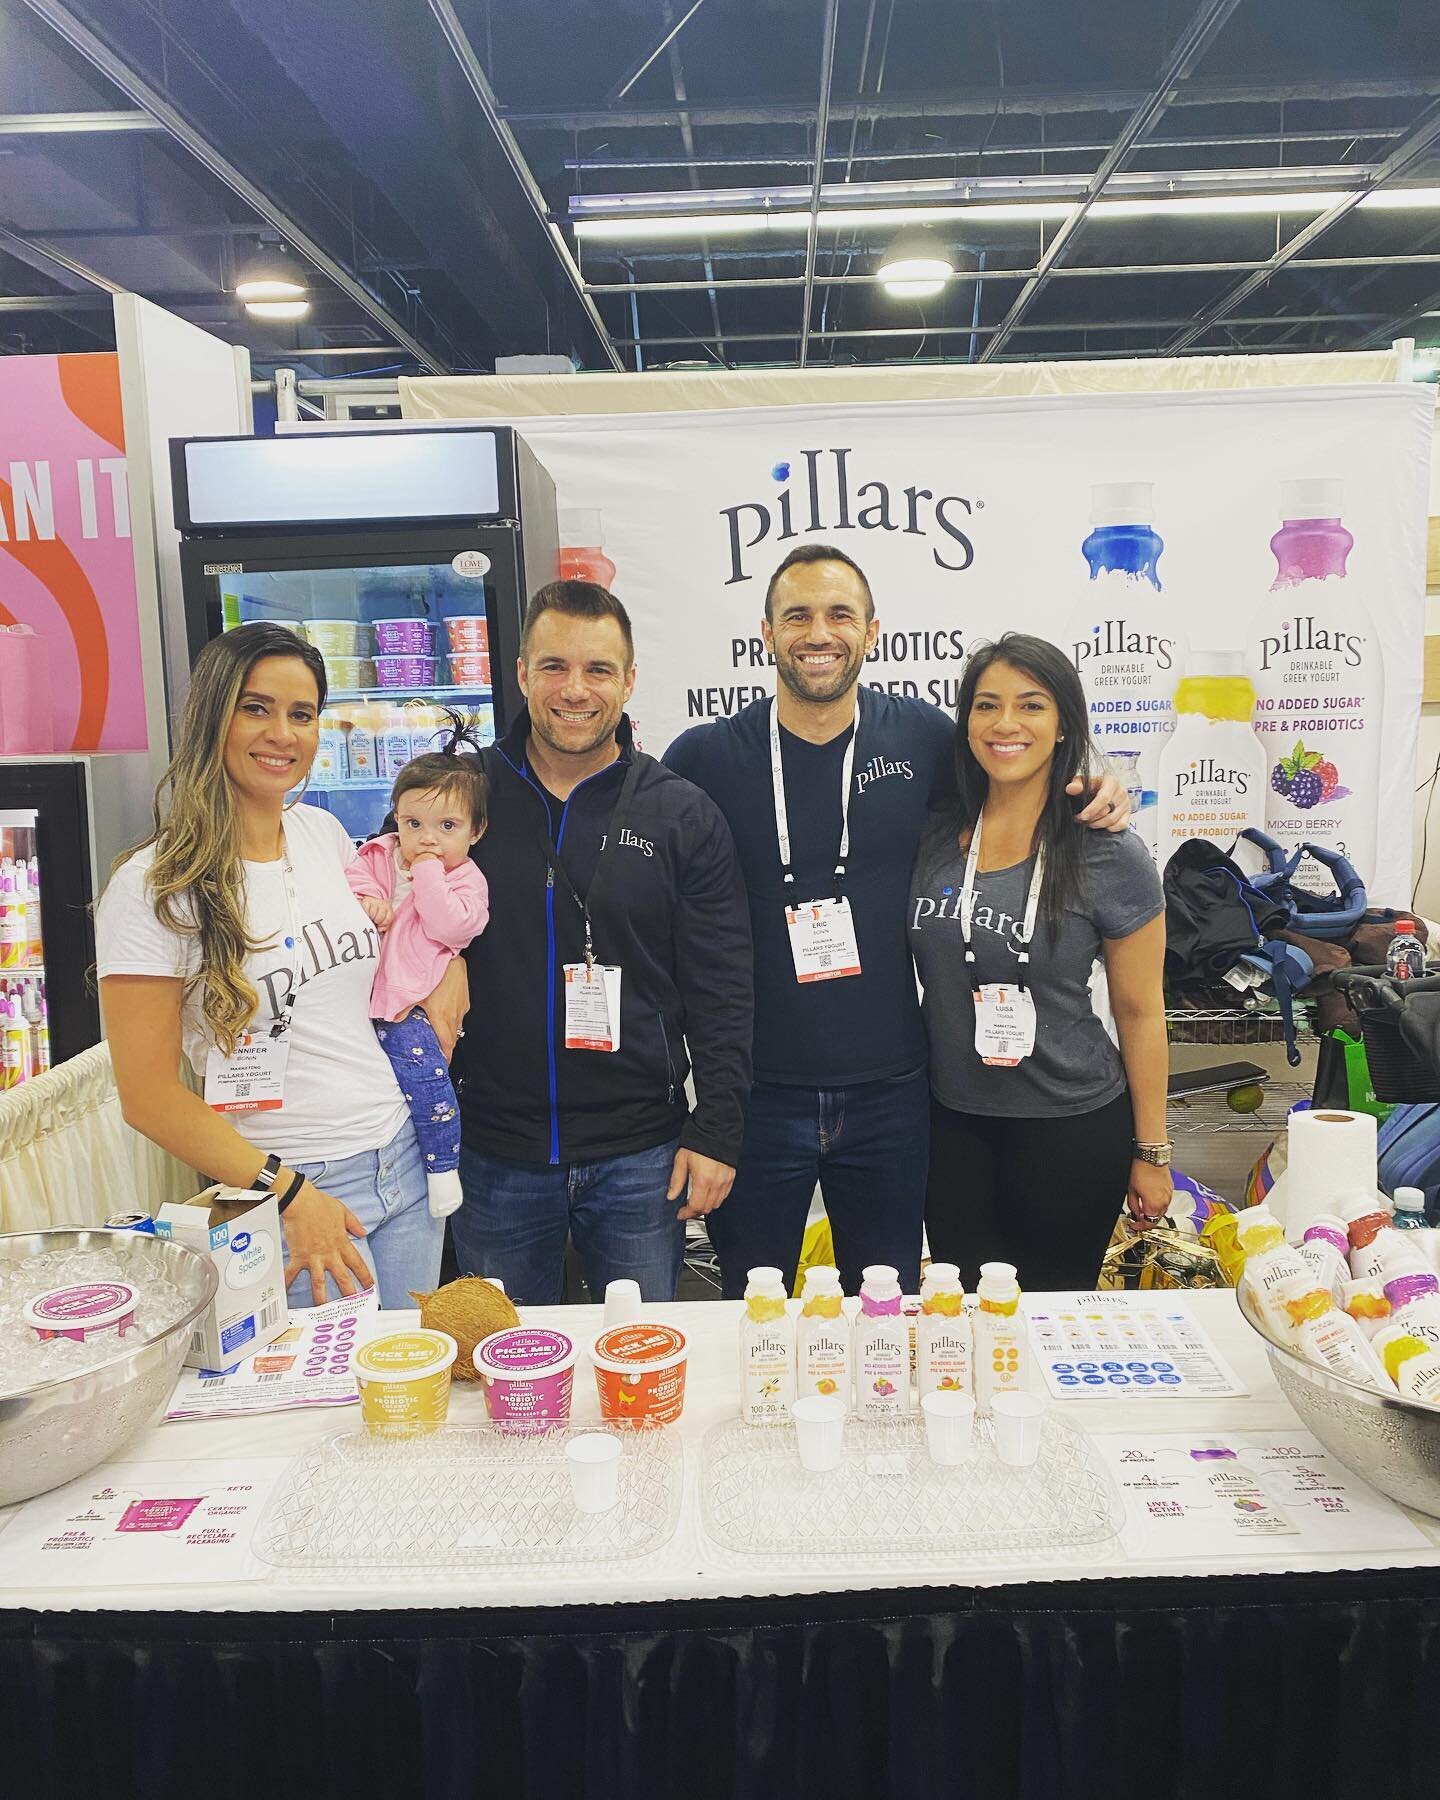 Had a blast at @natprodexpo! 
A family-affair sharing the tastiest,  lowest-sugar yogurts in all the land 👌😎

#naturallysimplenaturallygood #pillarsyogurt #naturalfood #fitnessjourney #fitfood #family #healthylifestyle